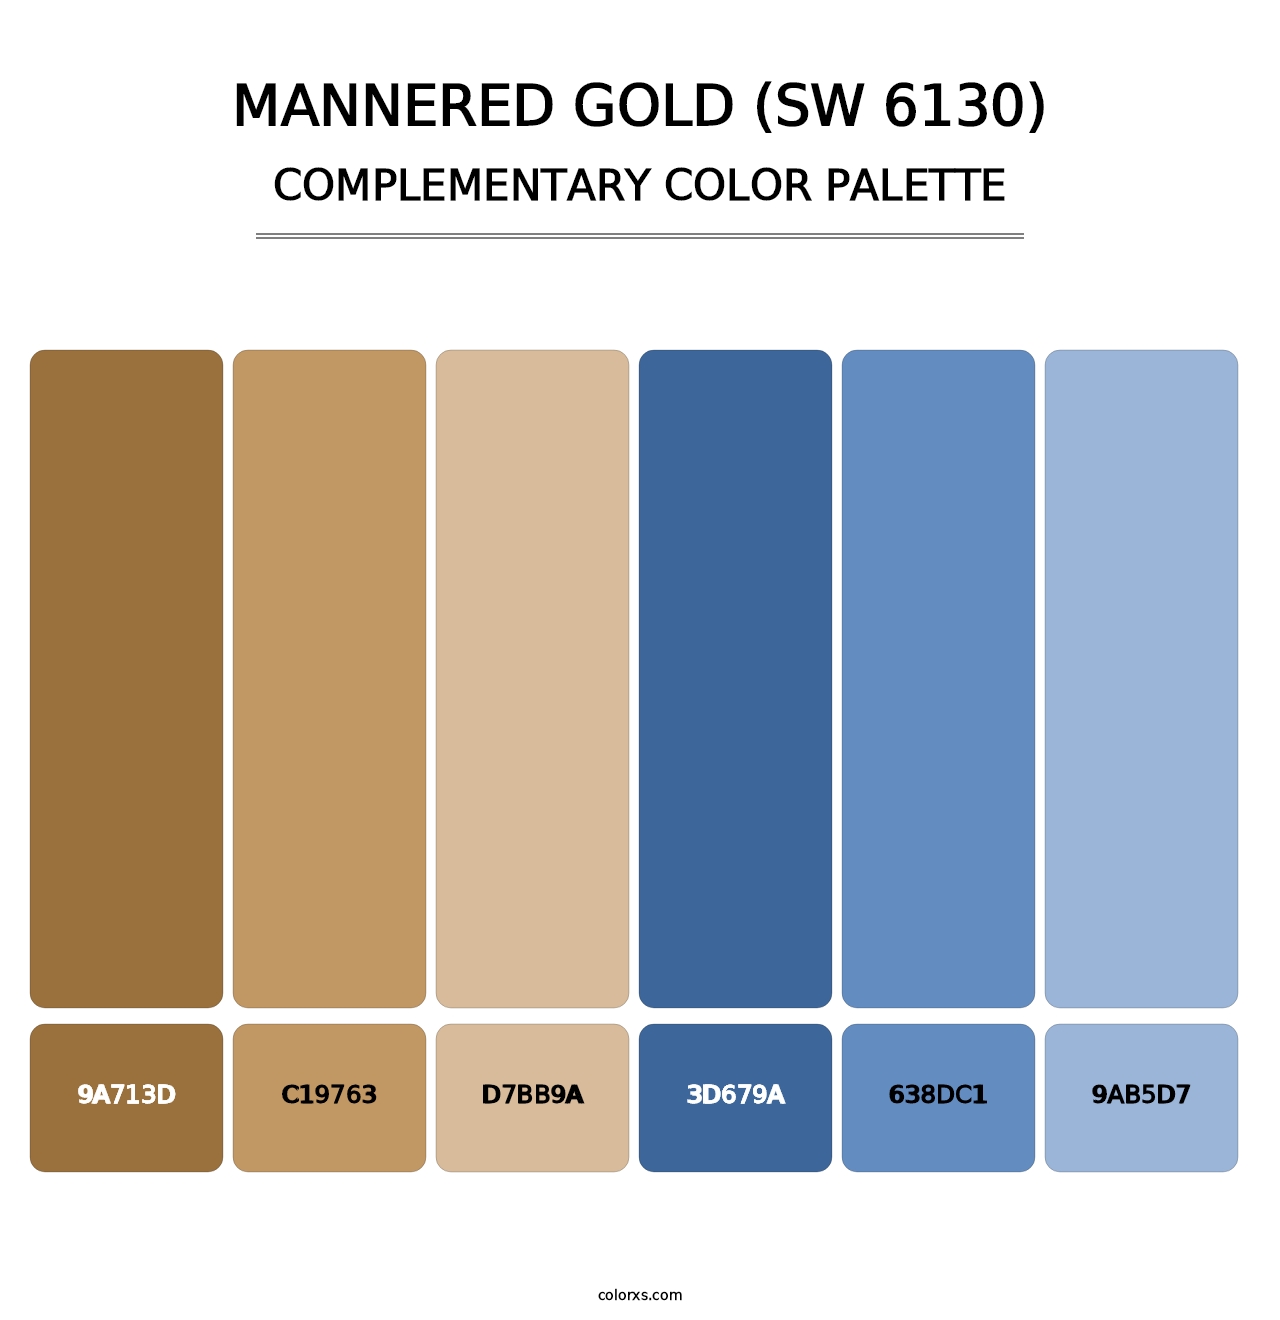 Mannered Gold (SW 6130) - Complementary Color Palette